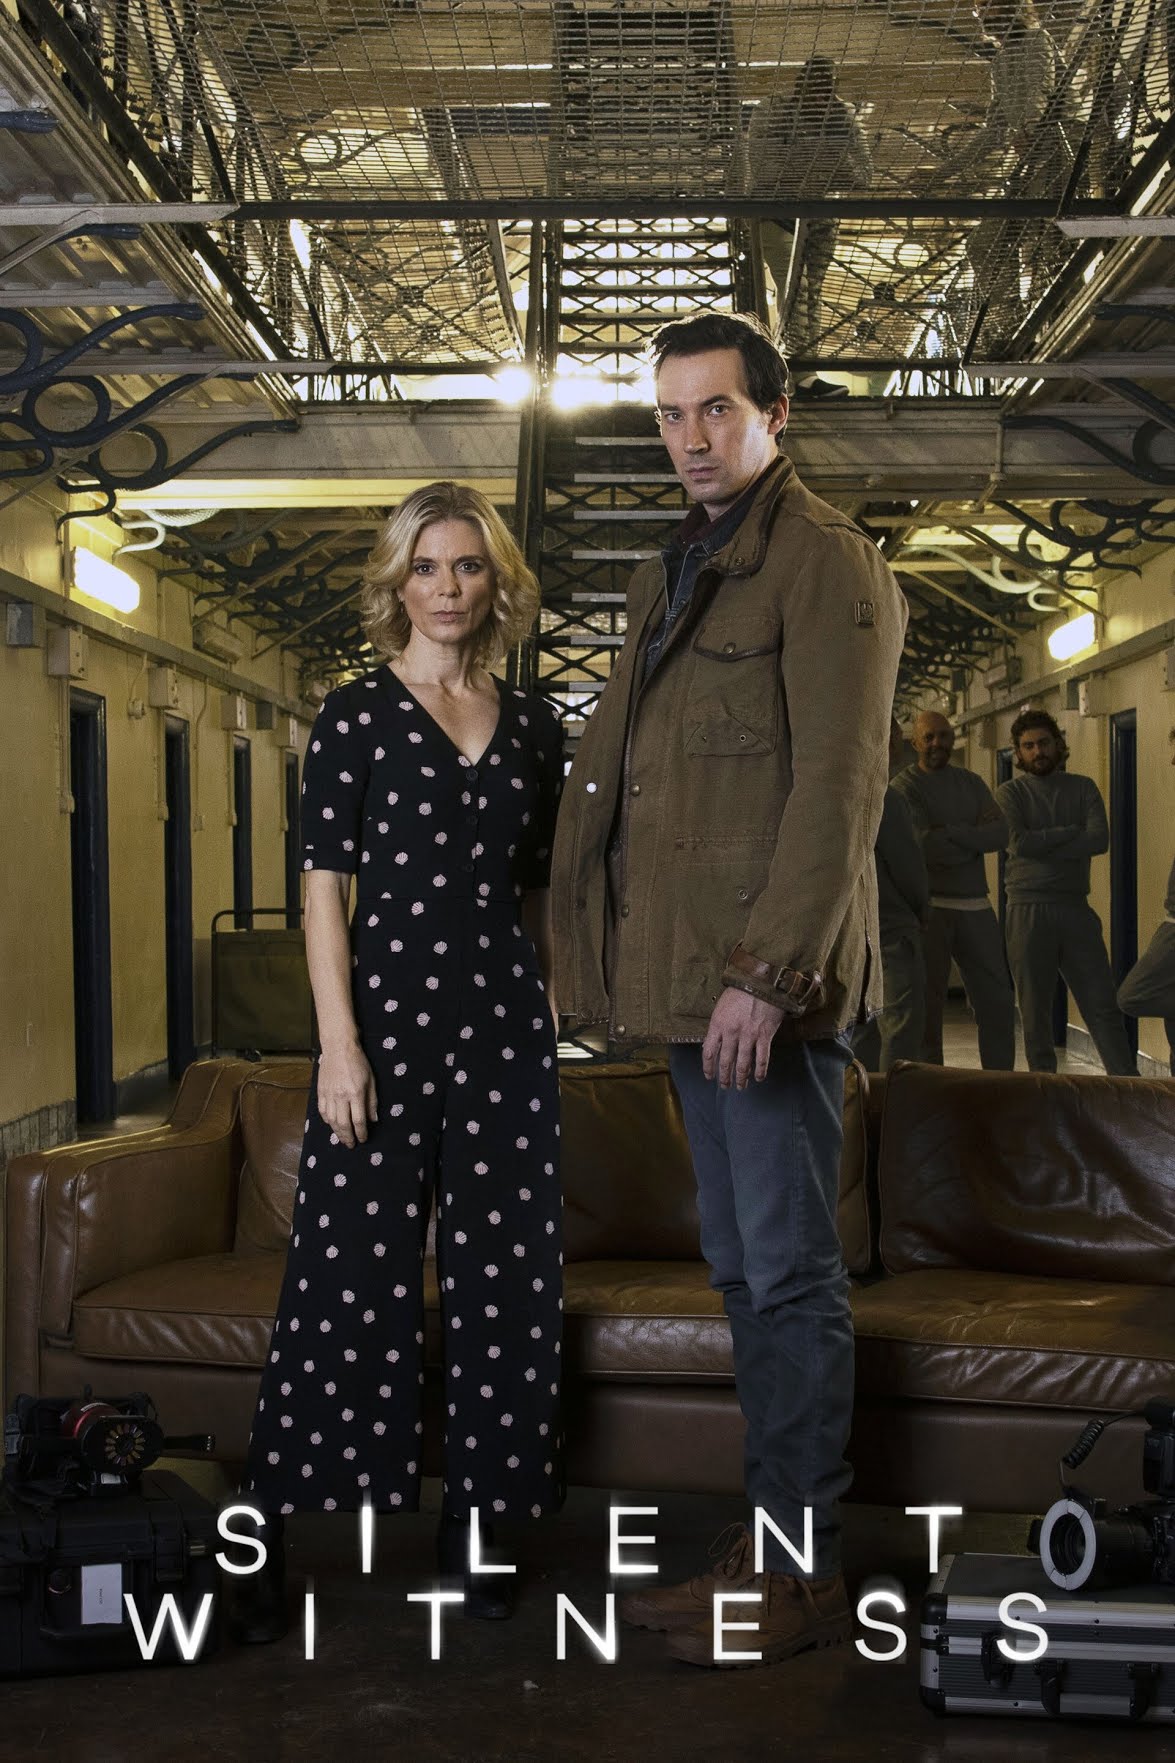 Silent Witness S24E03 Bad Love Part 1 H264 1080p 6ch